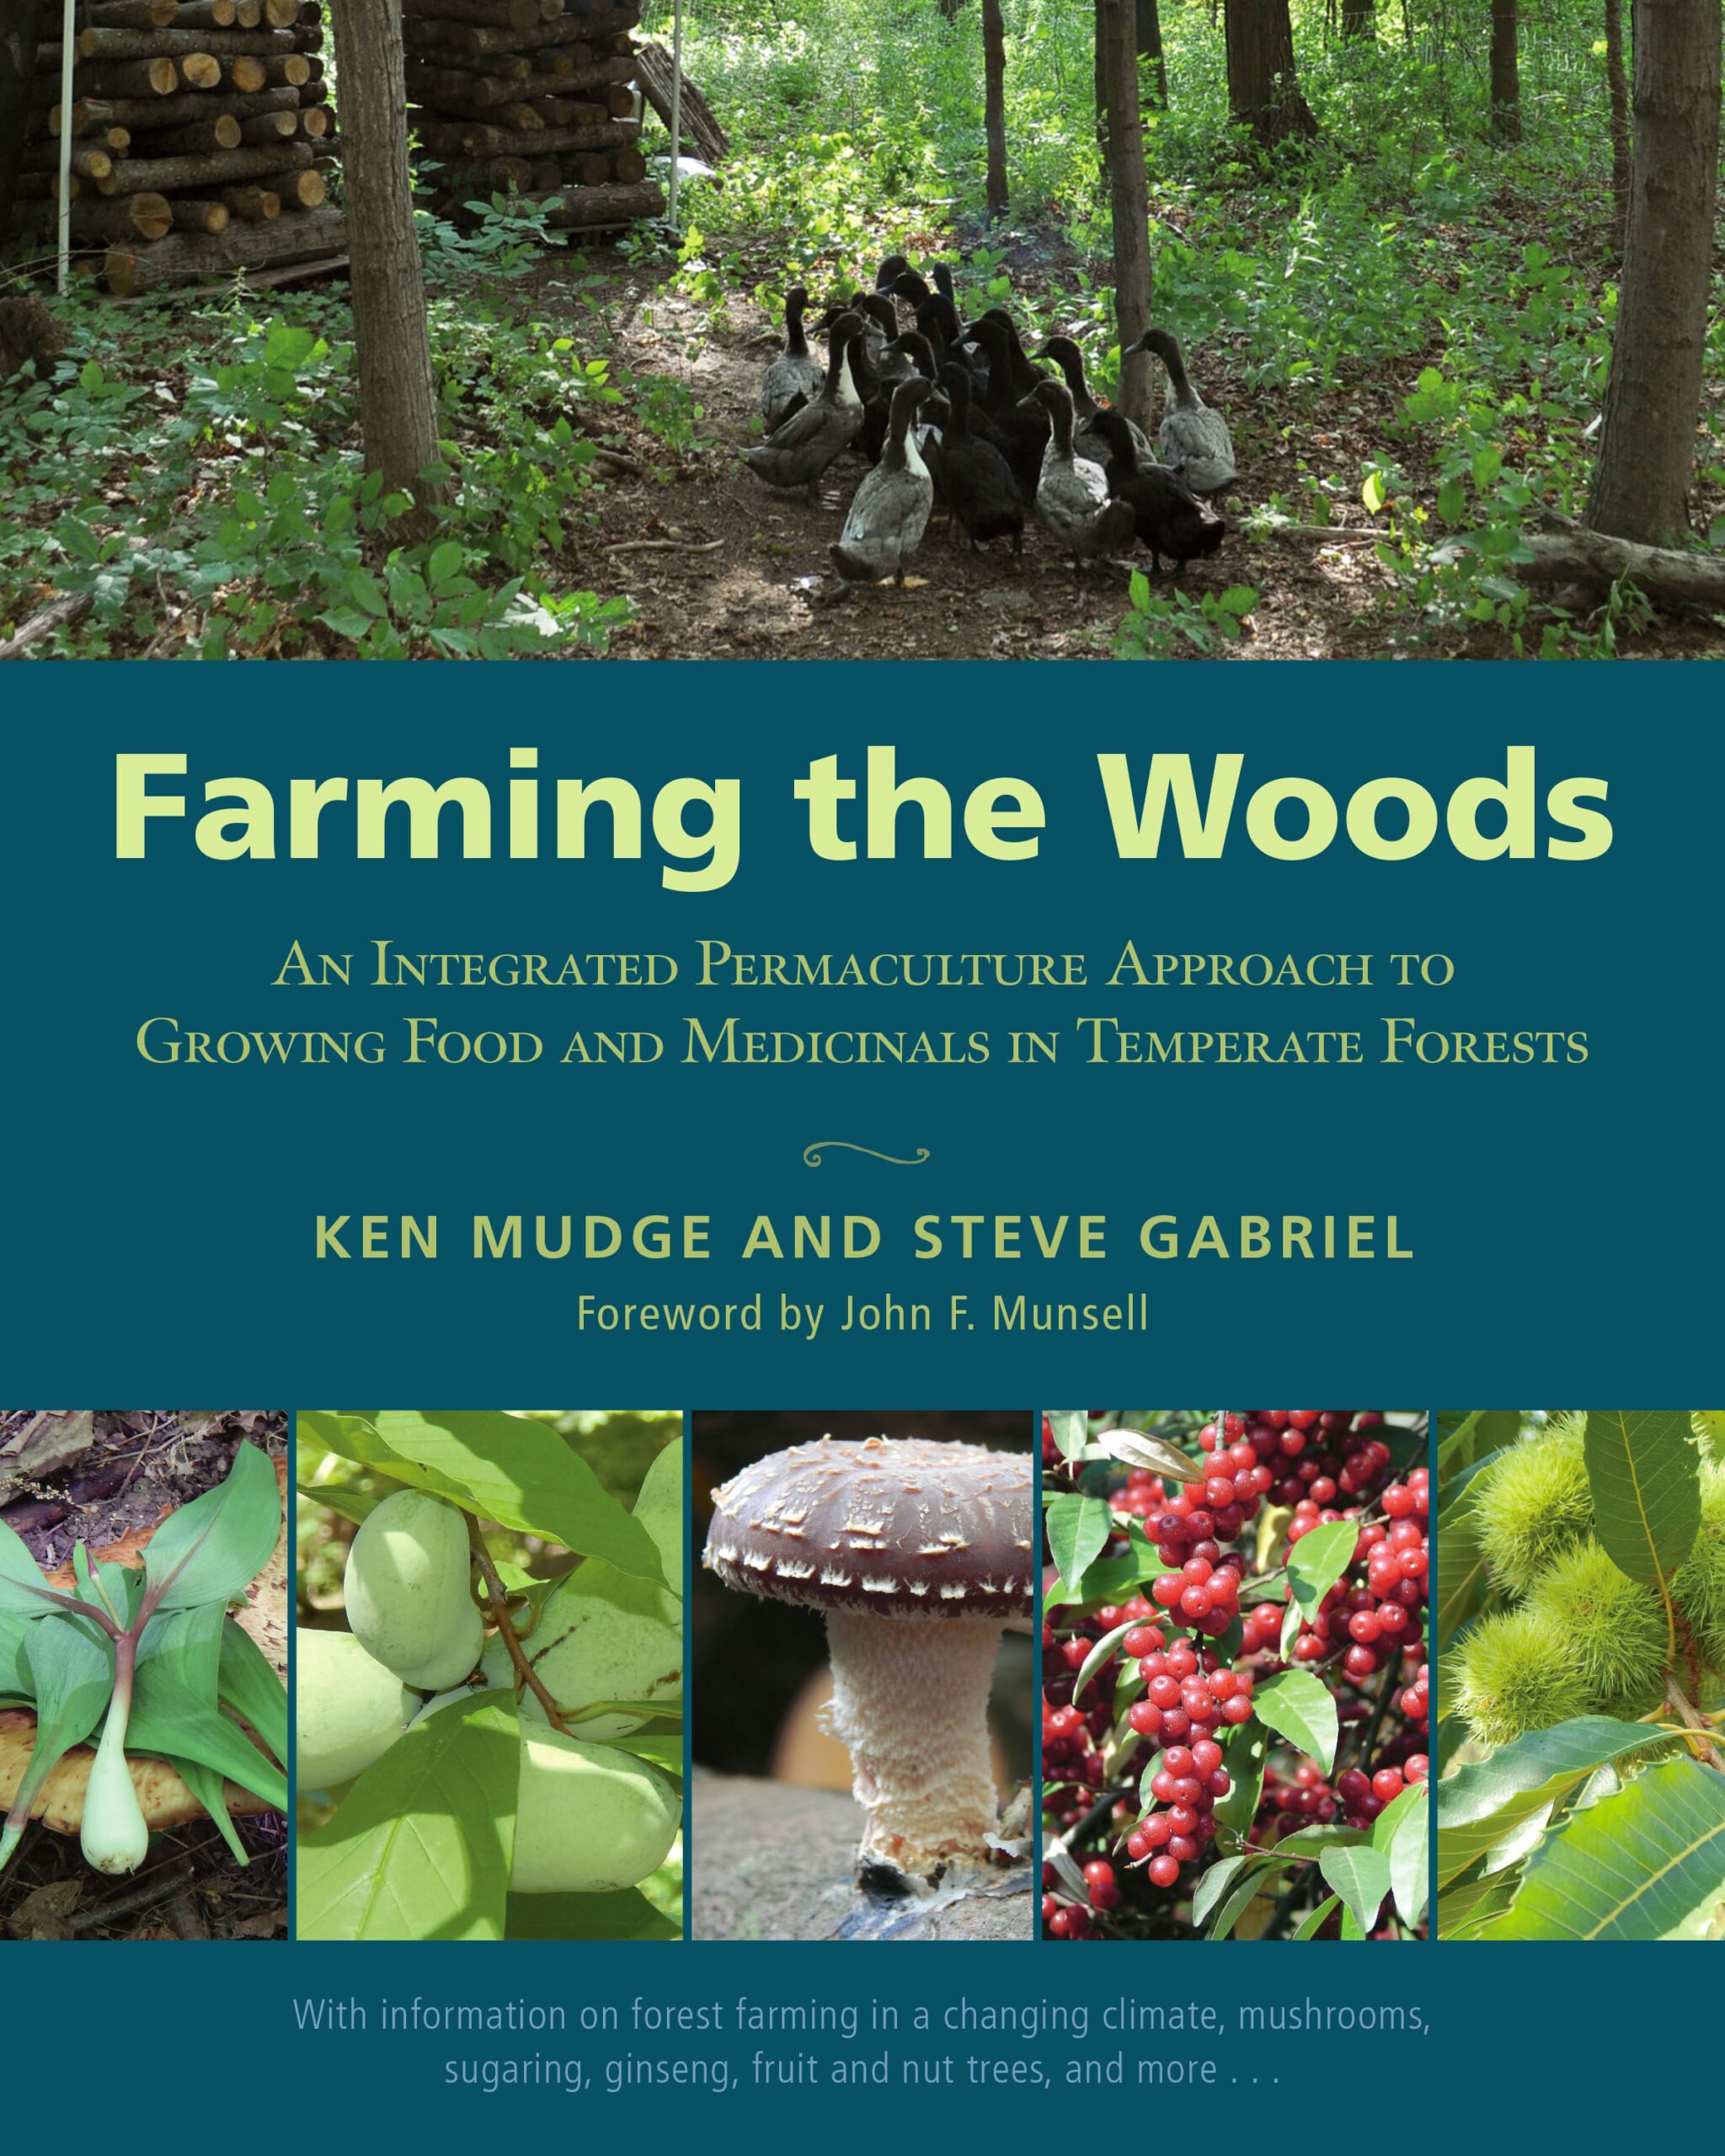 The Farming the Woods cover